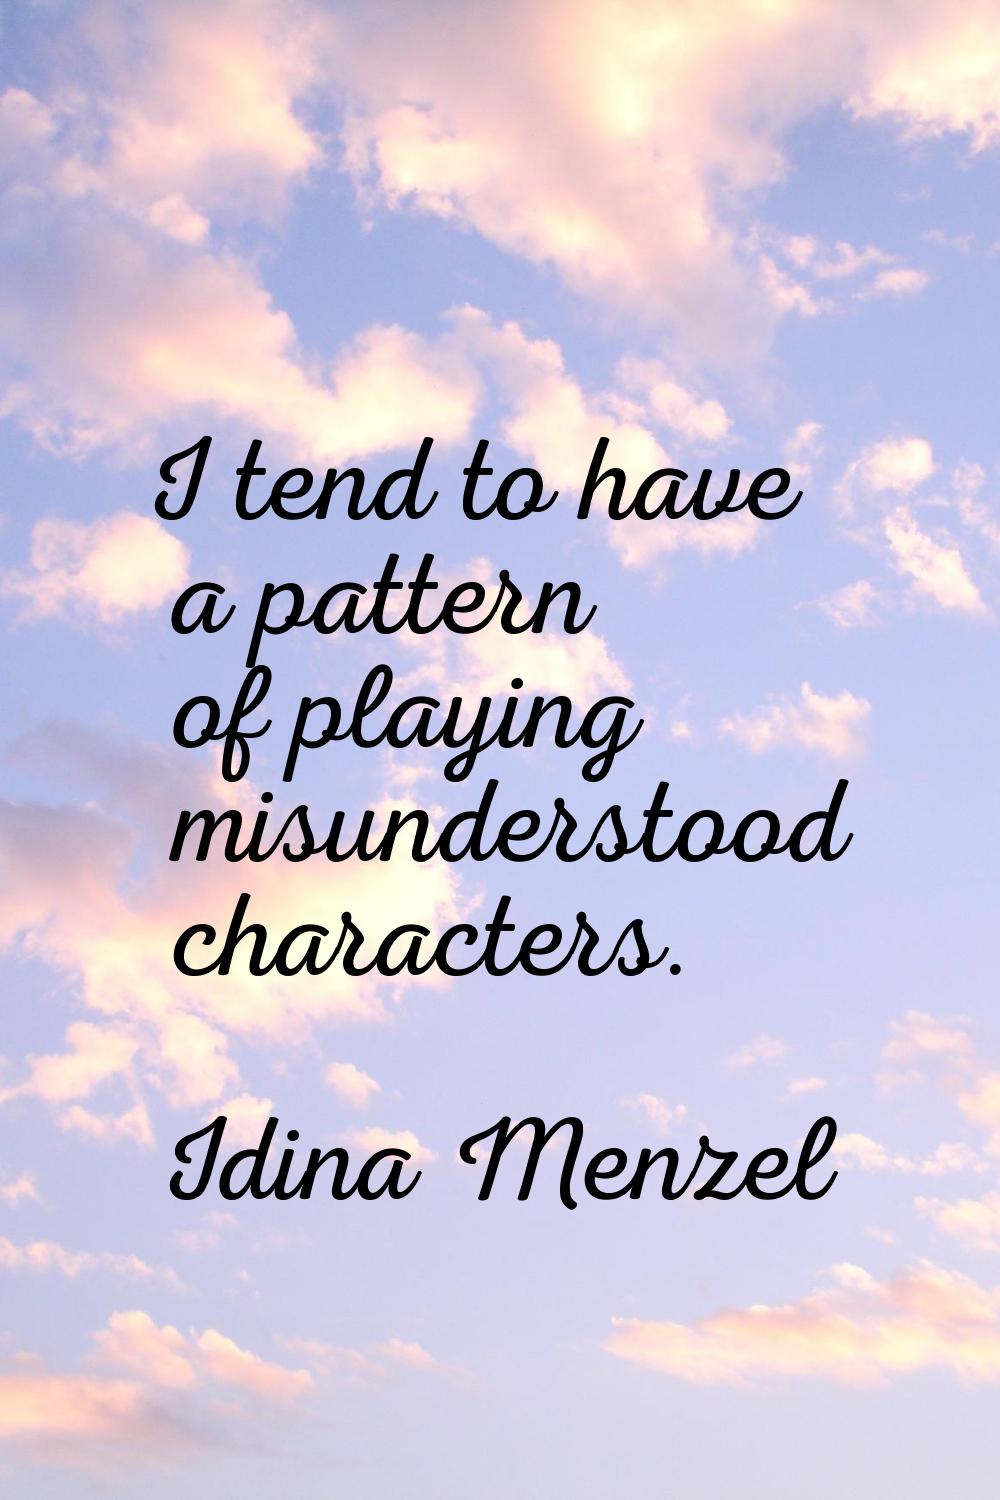 I tend to have a pattern of playing misunderstood characters.